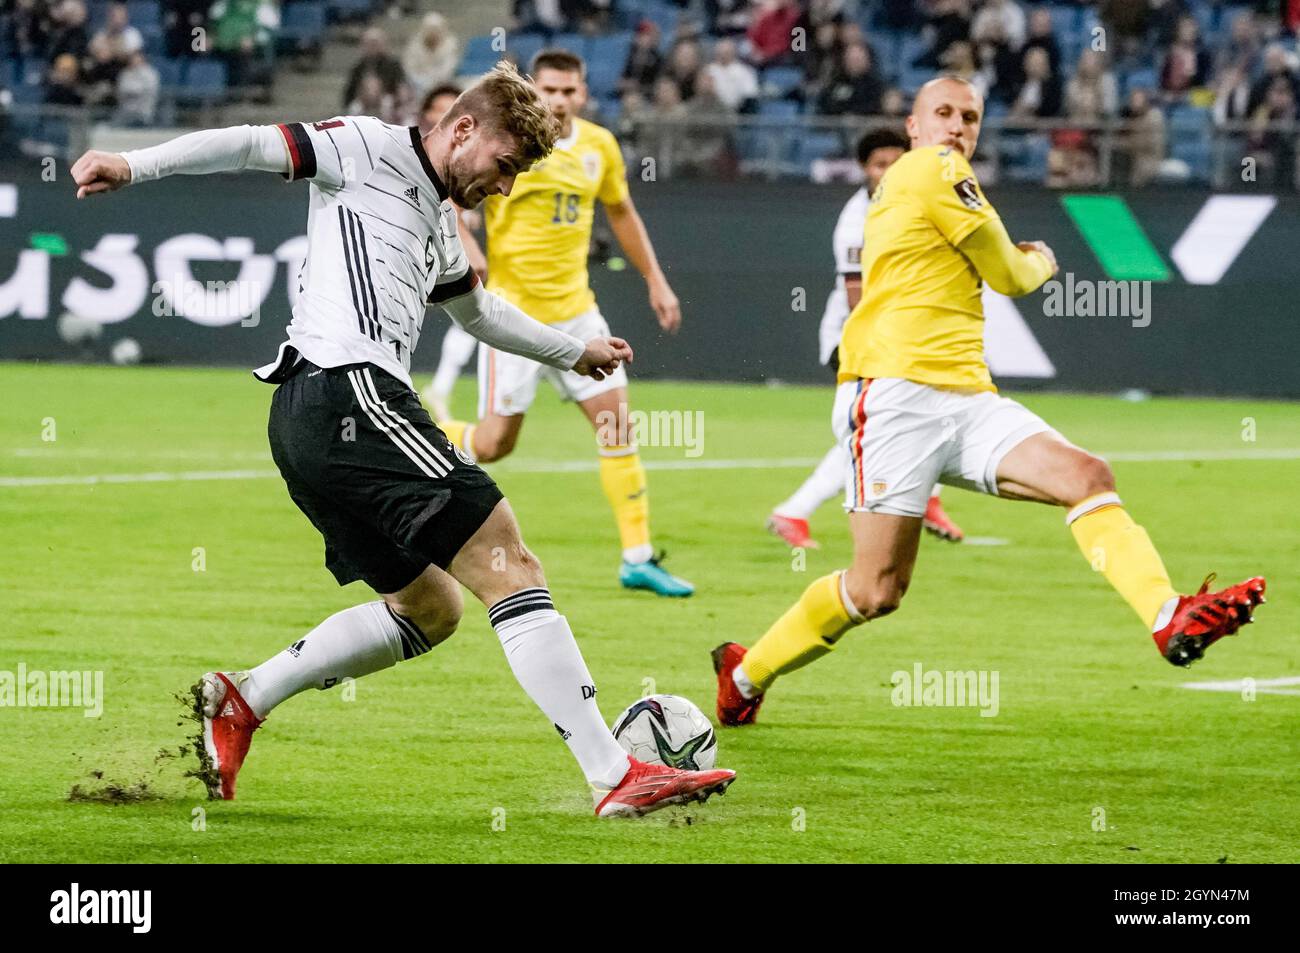 Hamburg, Germany. 08th Oct, 2021. Football: World Cup Qualification Europe, Germany - Romania, Group Stage, Group J, Matchday 7 at Volksparkstadion. Germany's Timo Werner (l) and Romania's Vlad Chiriches fight for the ball. Credit: Axel Heimken/dpa/Alamy Live News Stock Photo